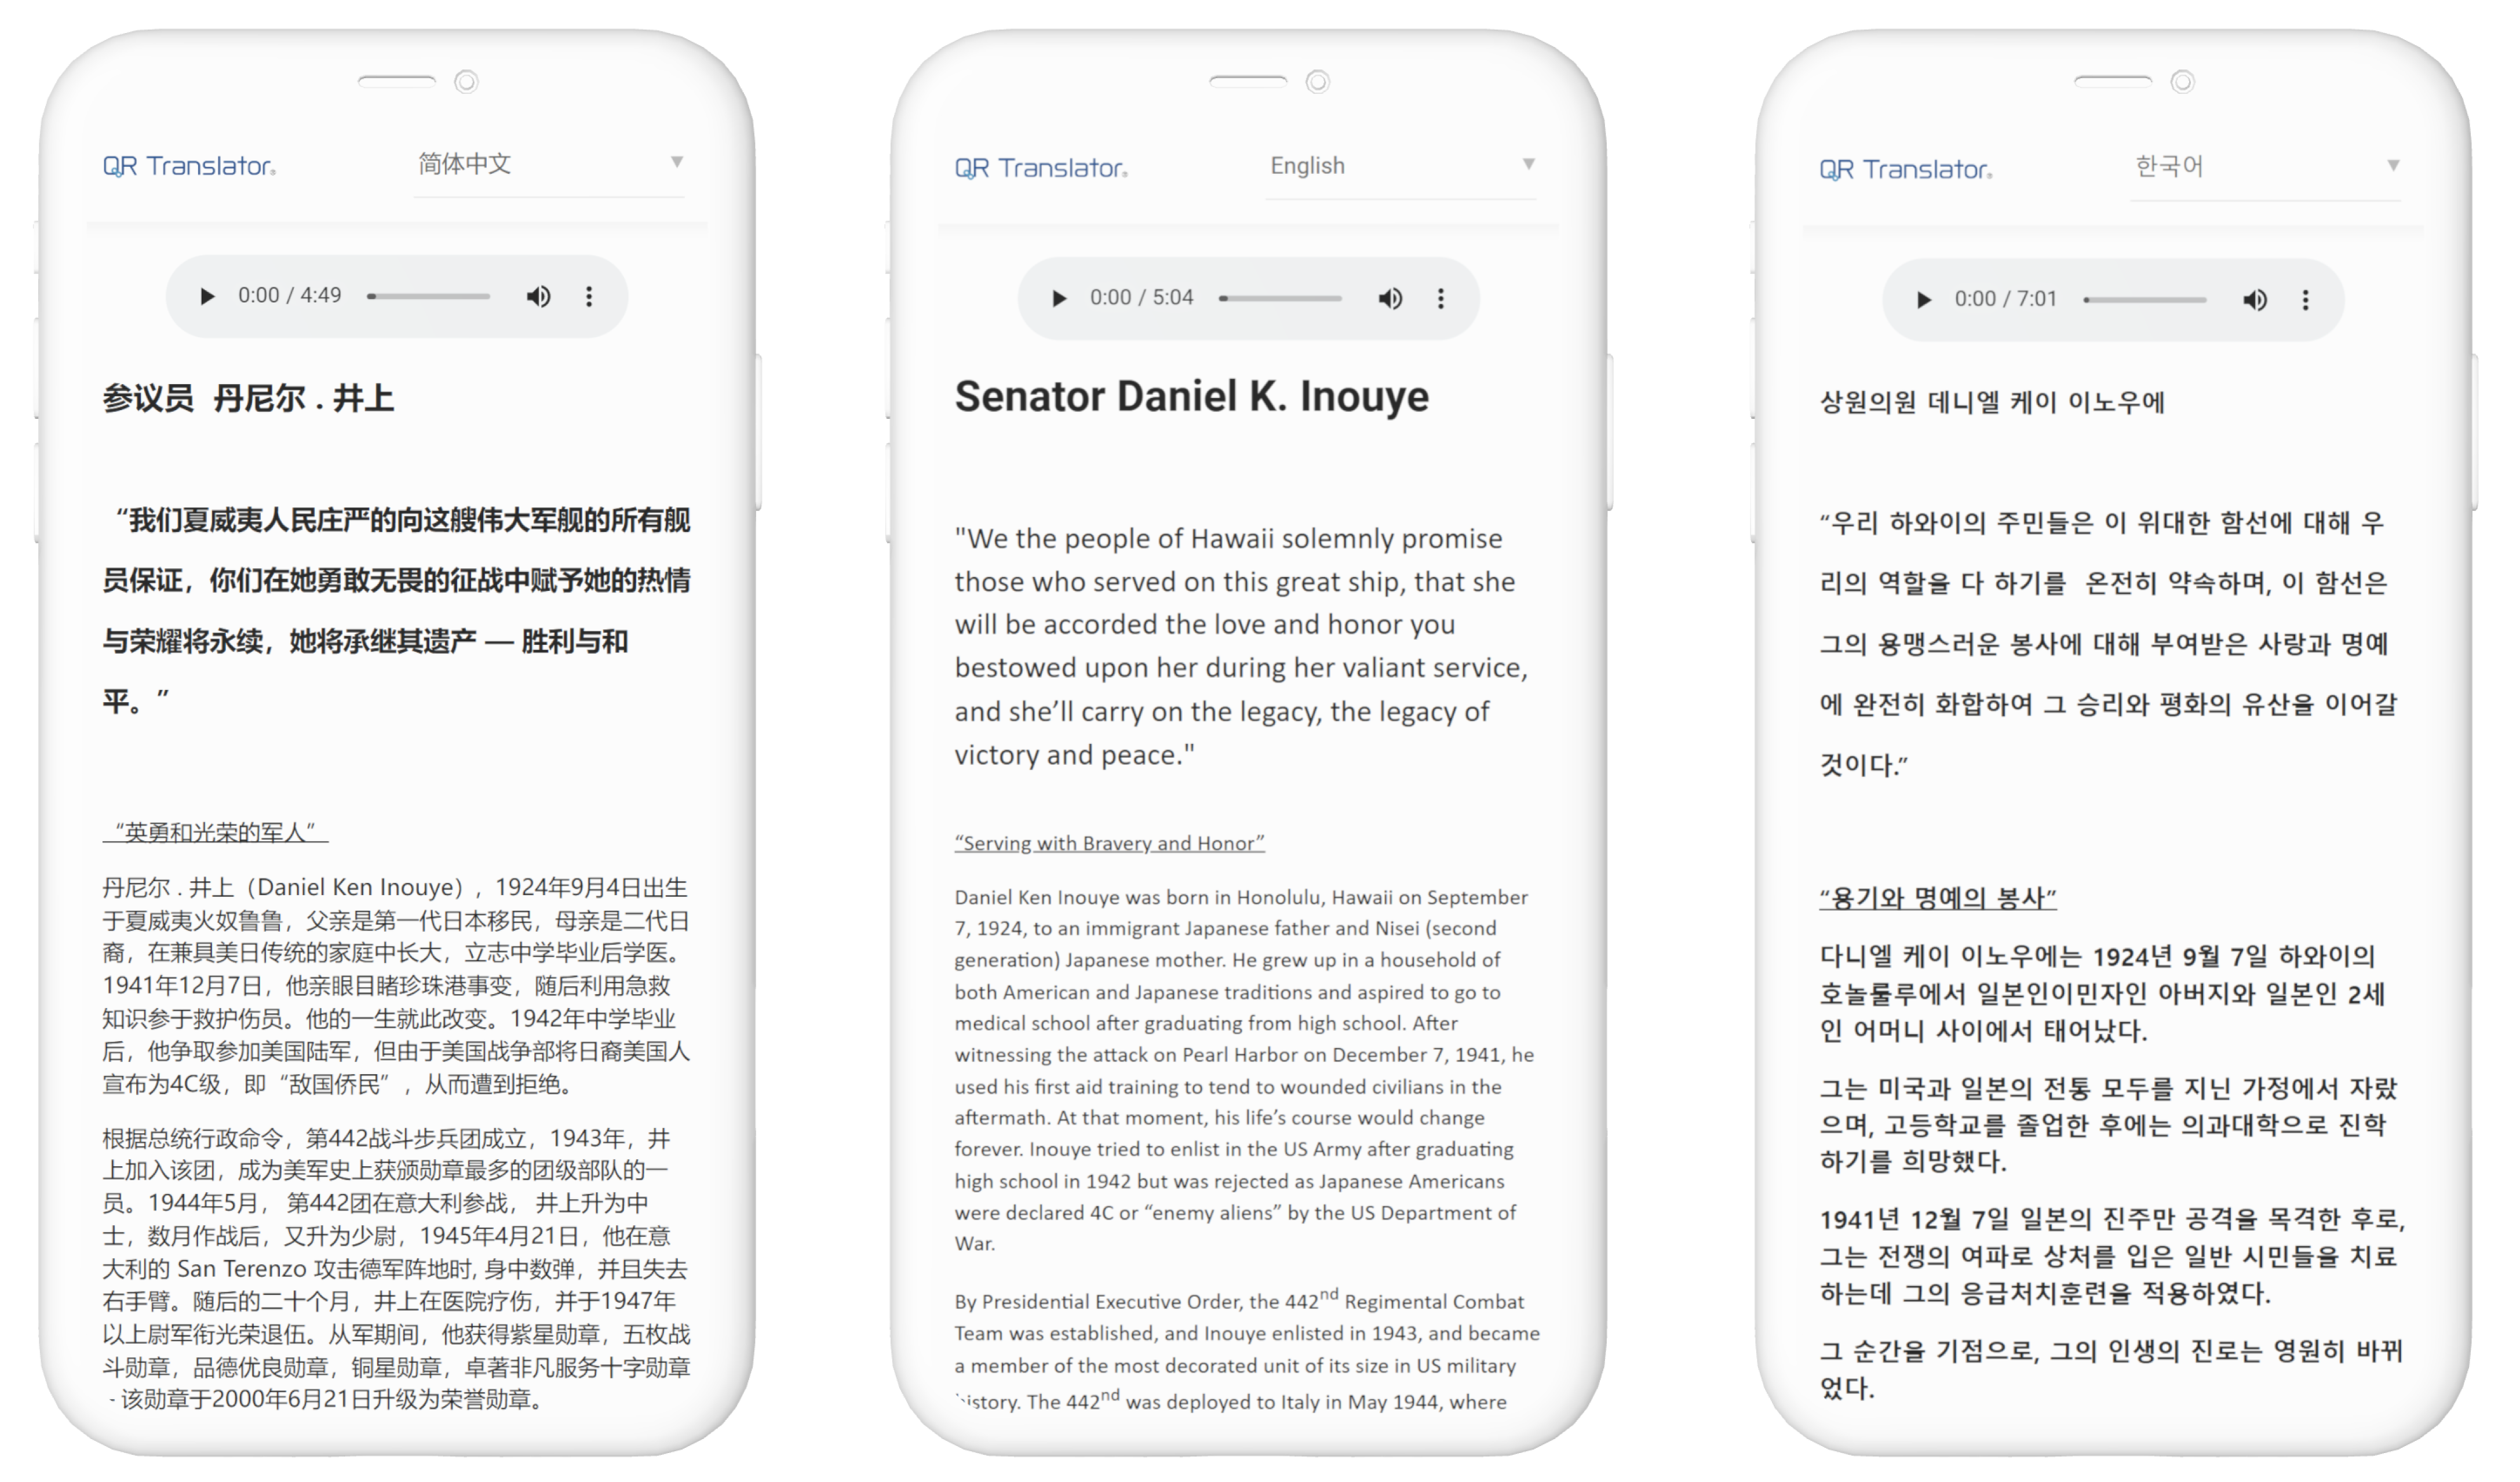 Example of content. 3 phones (mockups) each showing qr code's content in English, Chinese (Simplified) and Korean respectively.